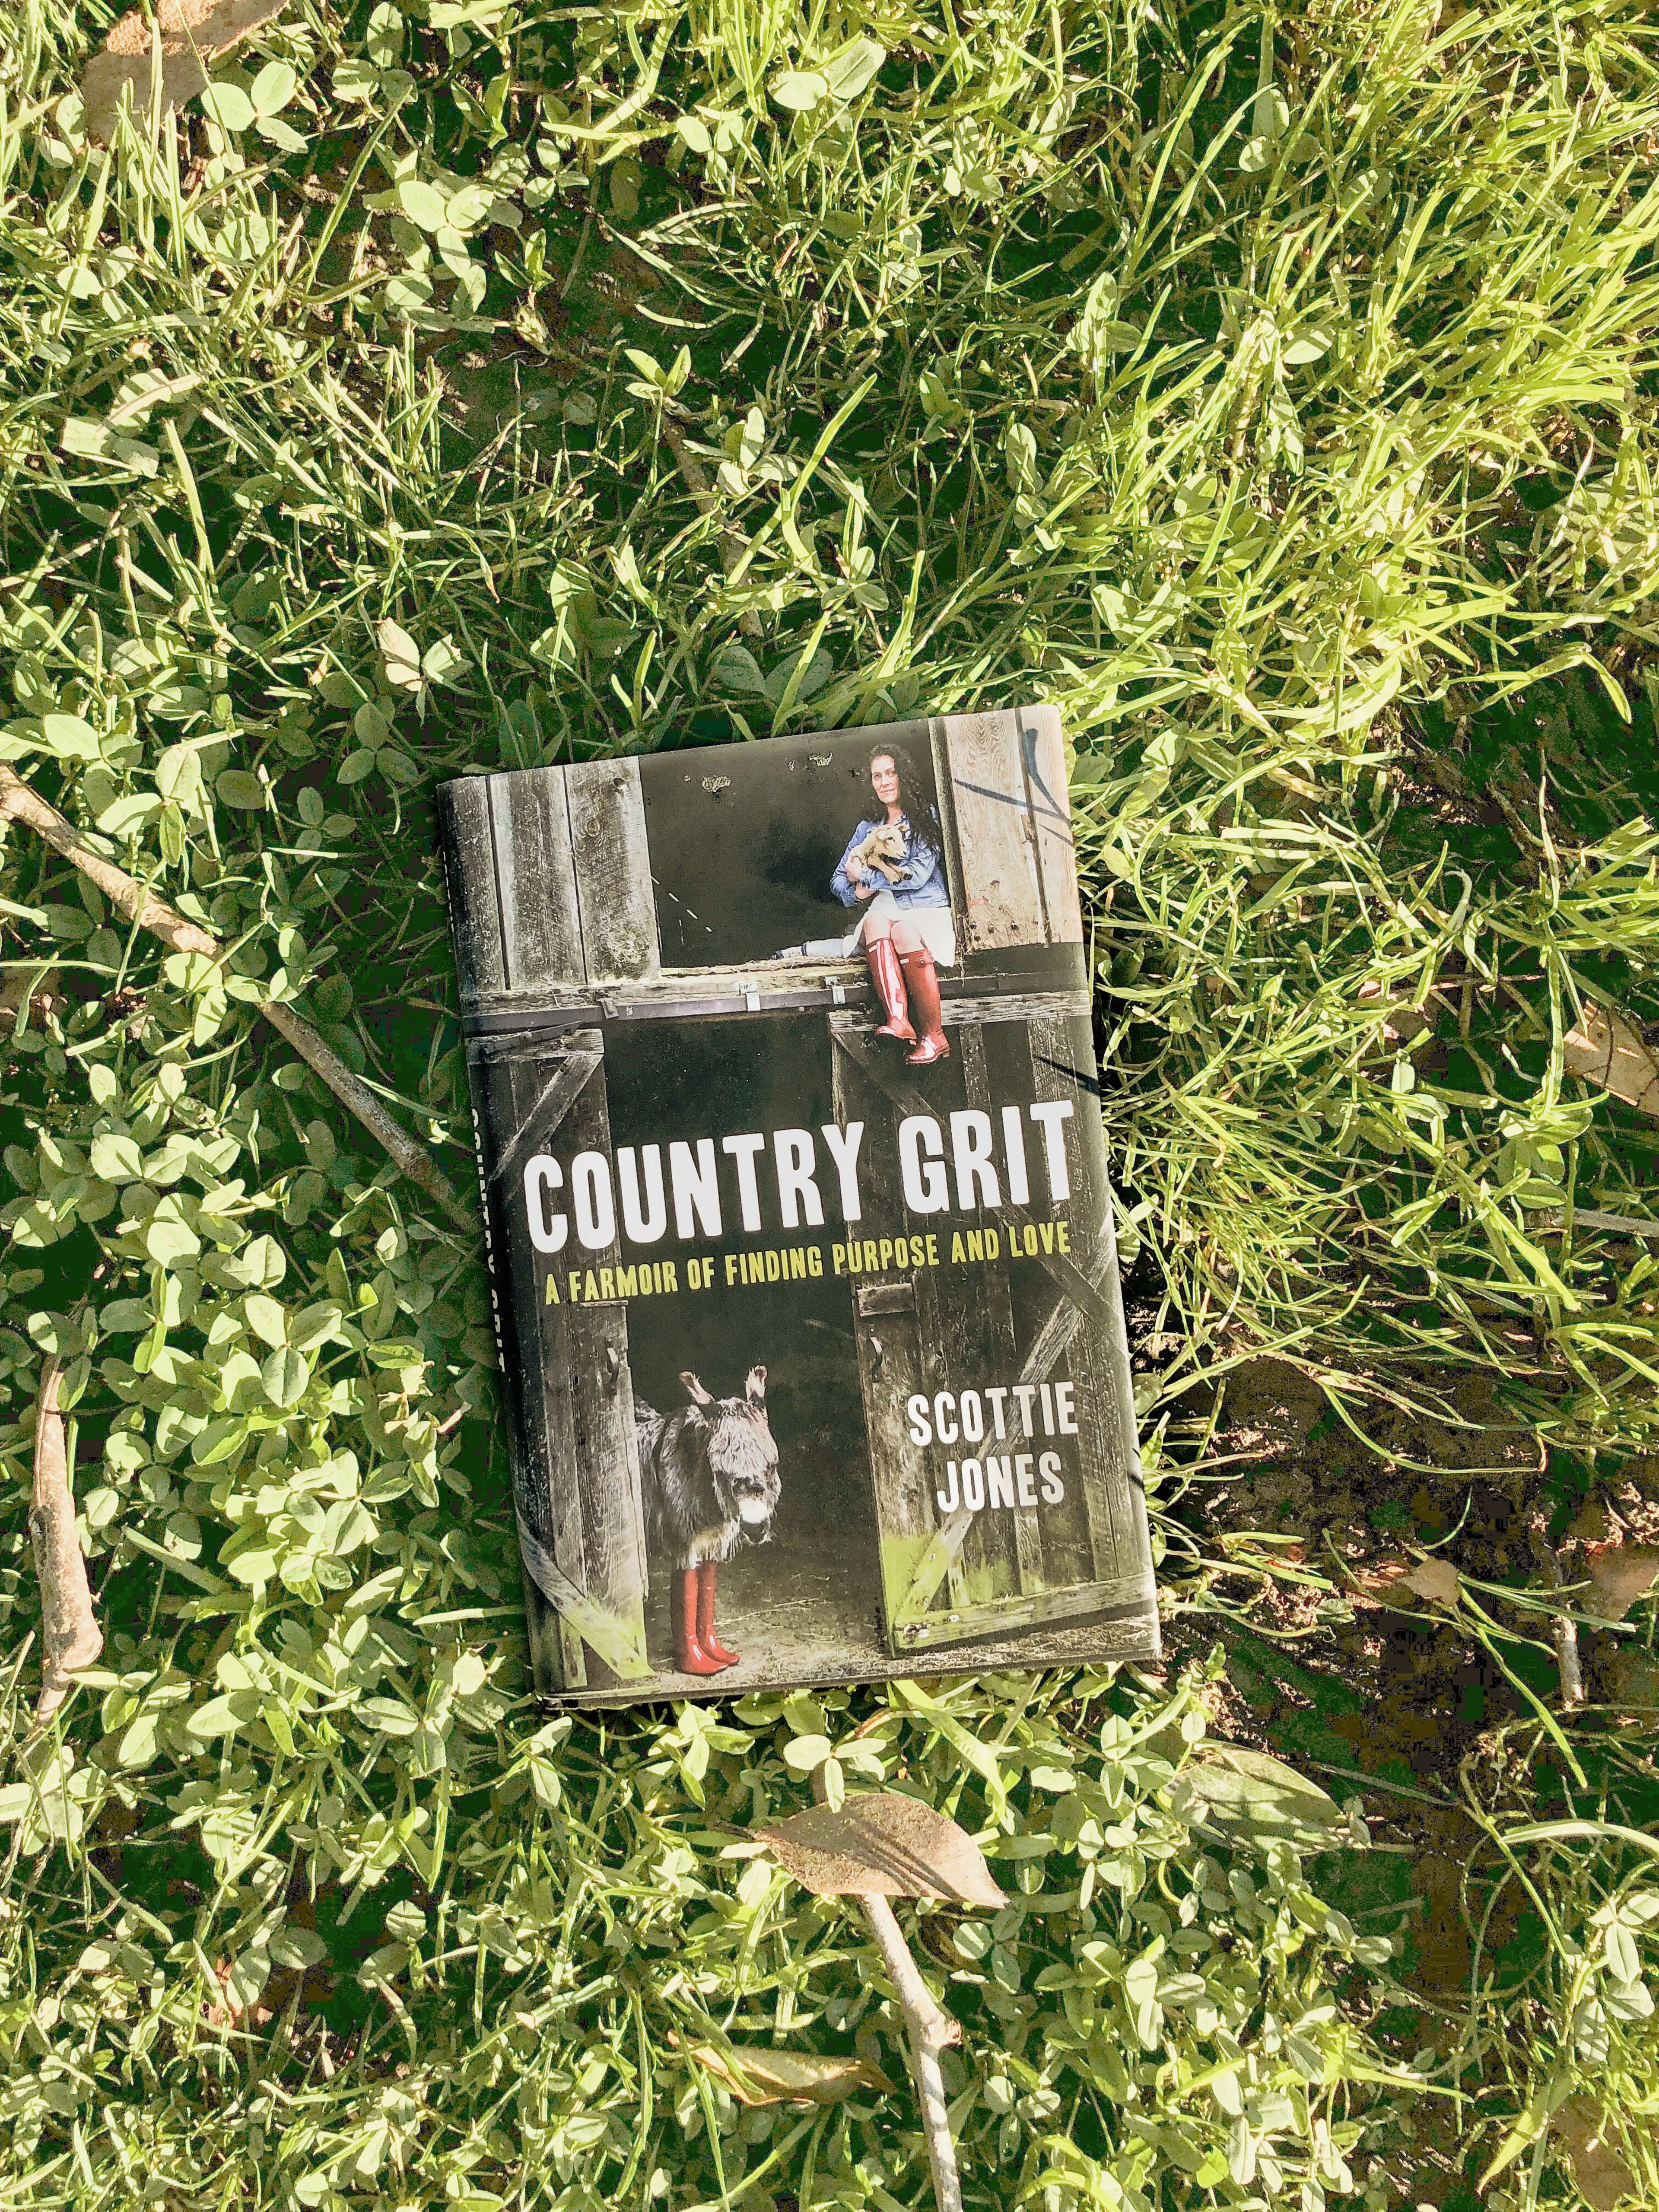 Book Giveaway: Country Grit – A Farmoir of Finding Purpose and Love